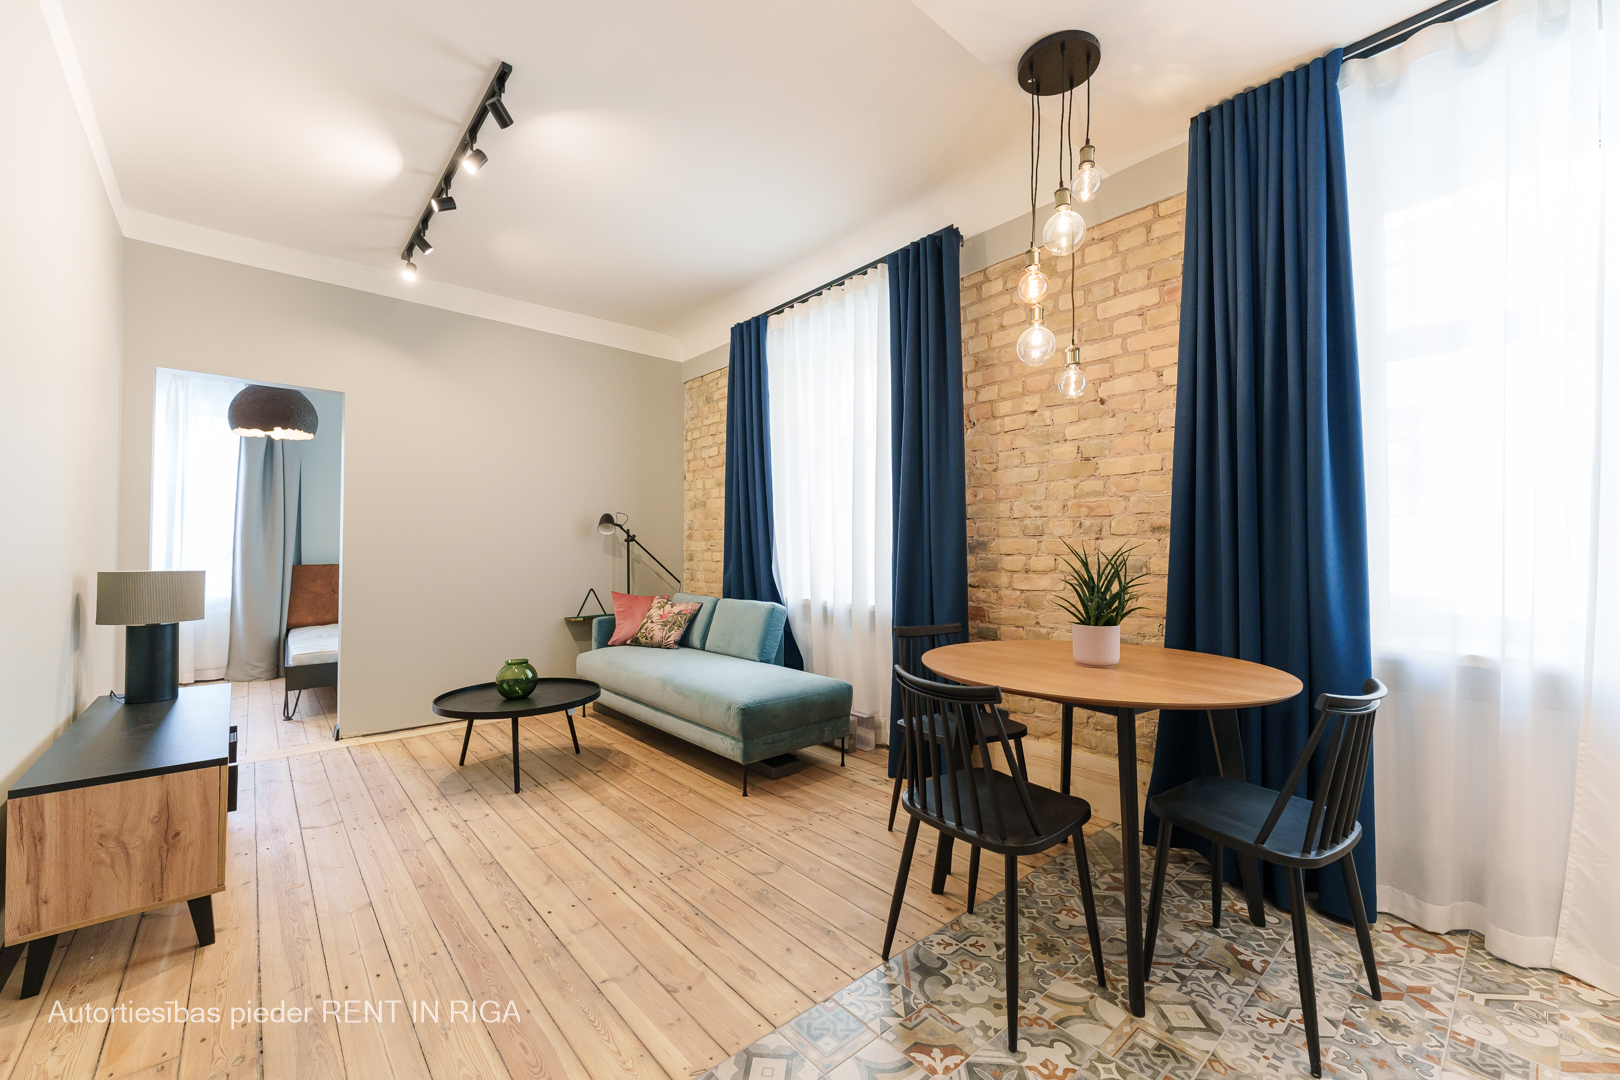 Apartment for sale, Stabu street 86 - Image 1